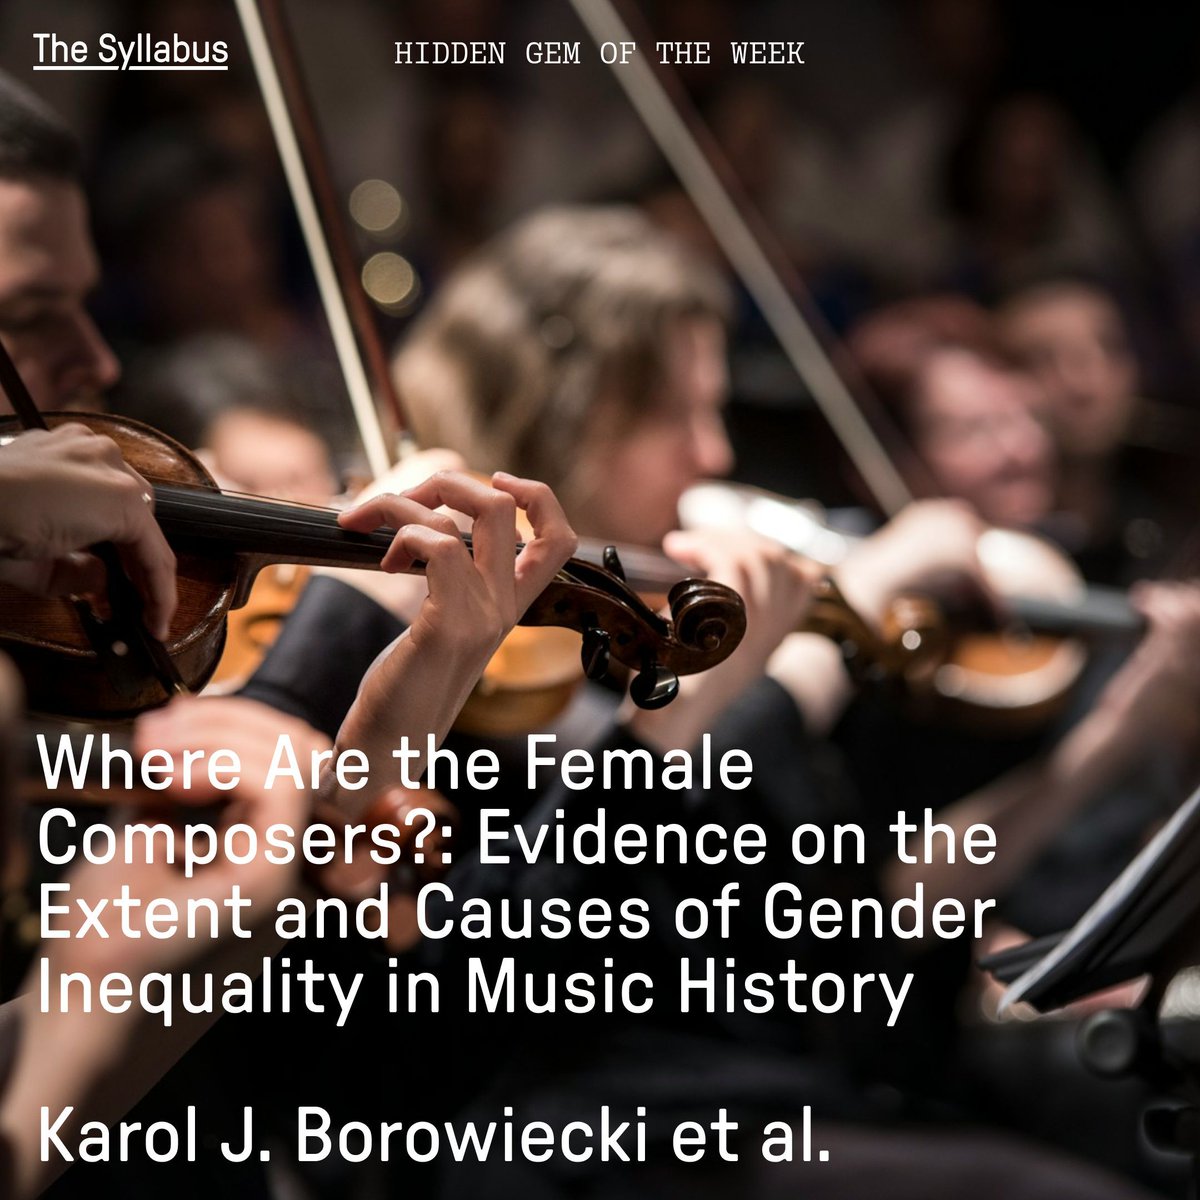 Our hidden gem of the week explores the disparity between the recognition of male and female composers. By @Arts_Econ in @The_EHES buff.ly/4a9Obio